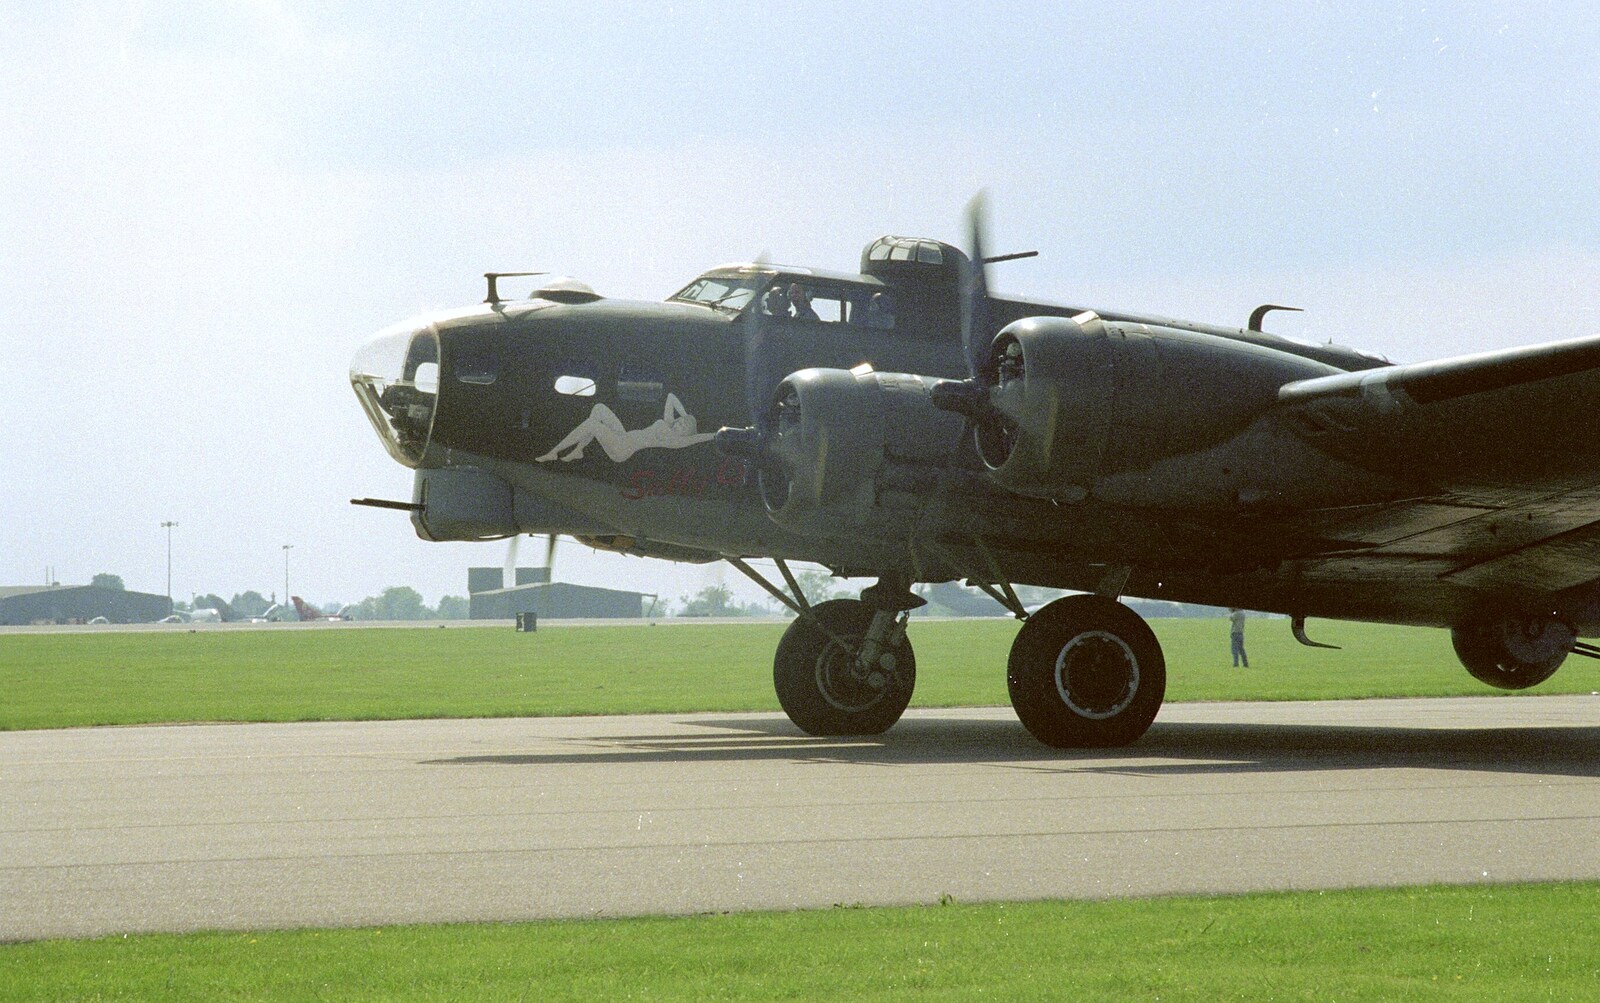 Sally B taxis by from The Mildenhall Air Fete, Mildenhall, Suffolk - 29th May 1994